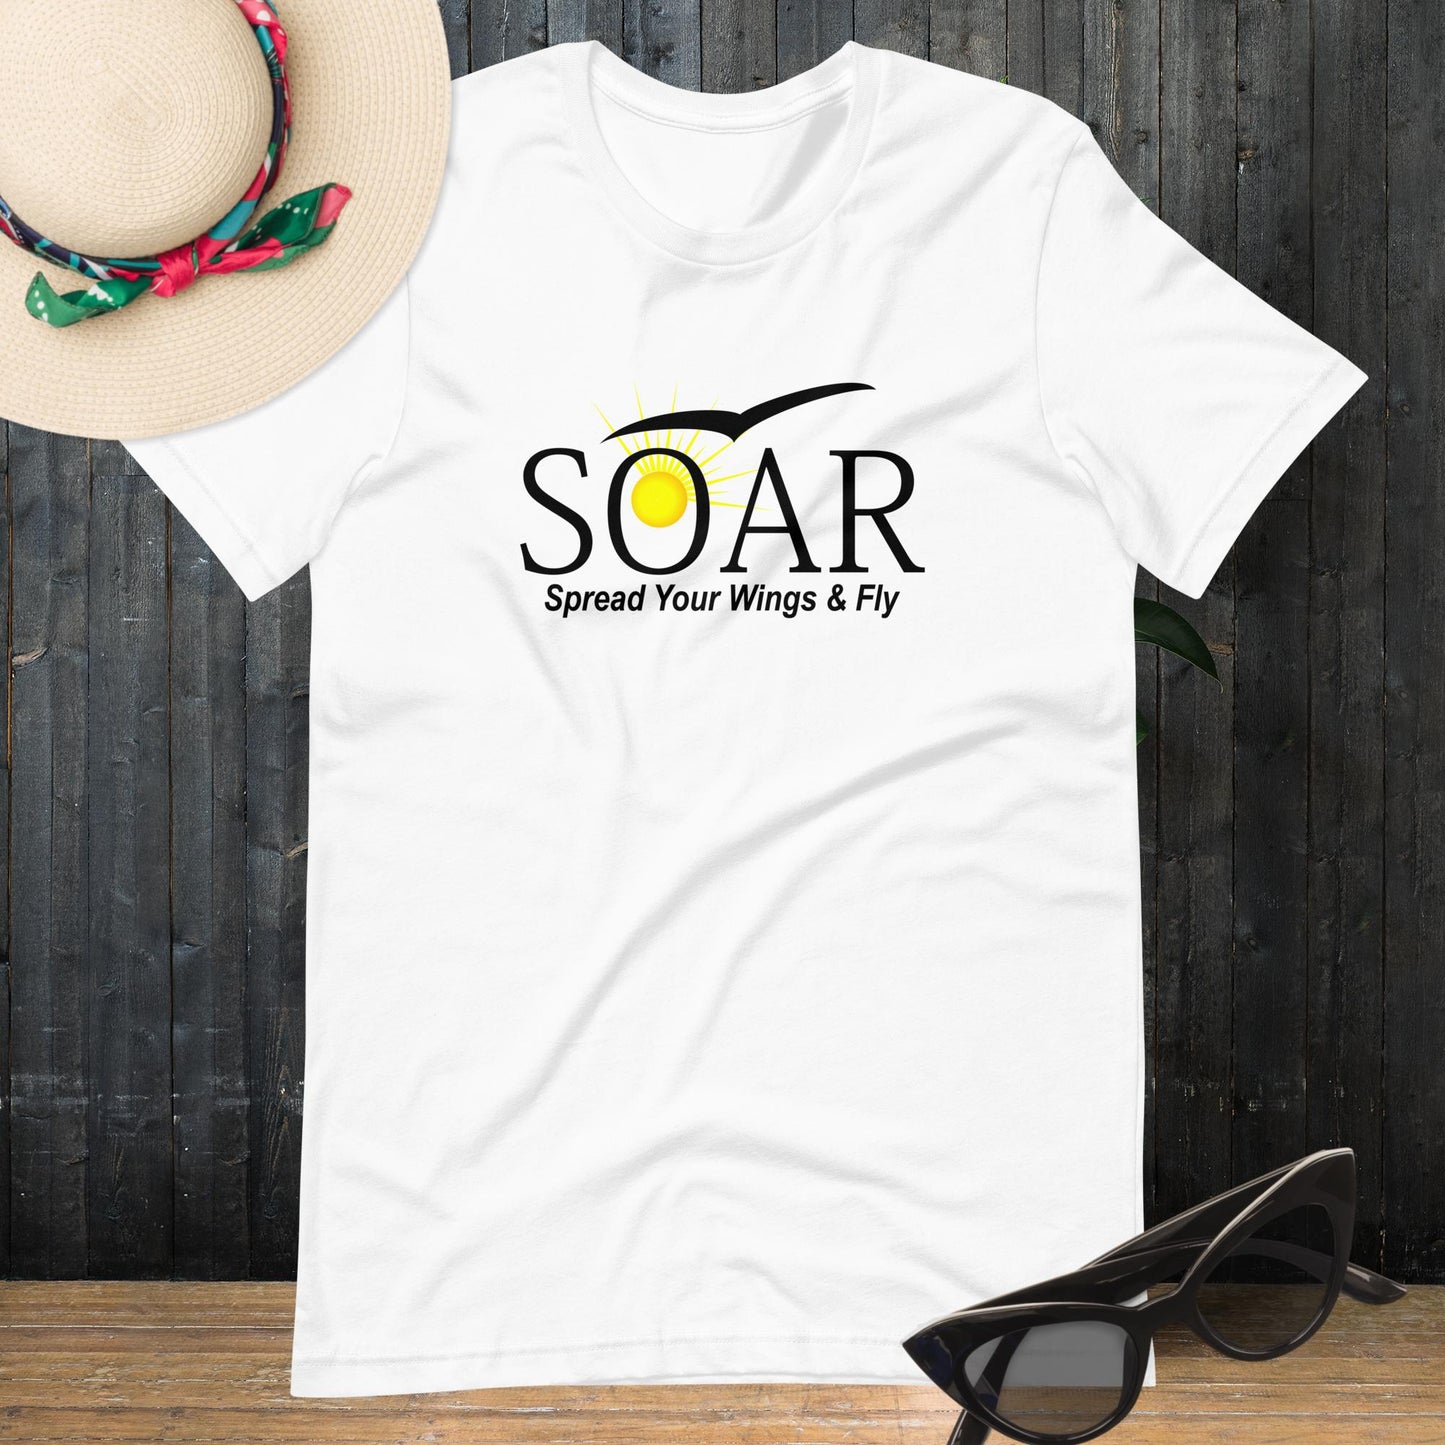 "White T-Shirt with 'SOAR' Graphic: Sun and Seagull Design, Motivating Flight. 'Spread your wings & fly' - Available at PuraFashions.com. Flat-lay image highlighting the front design."